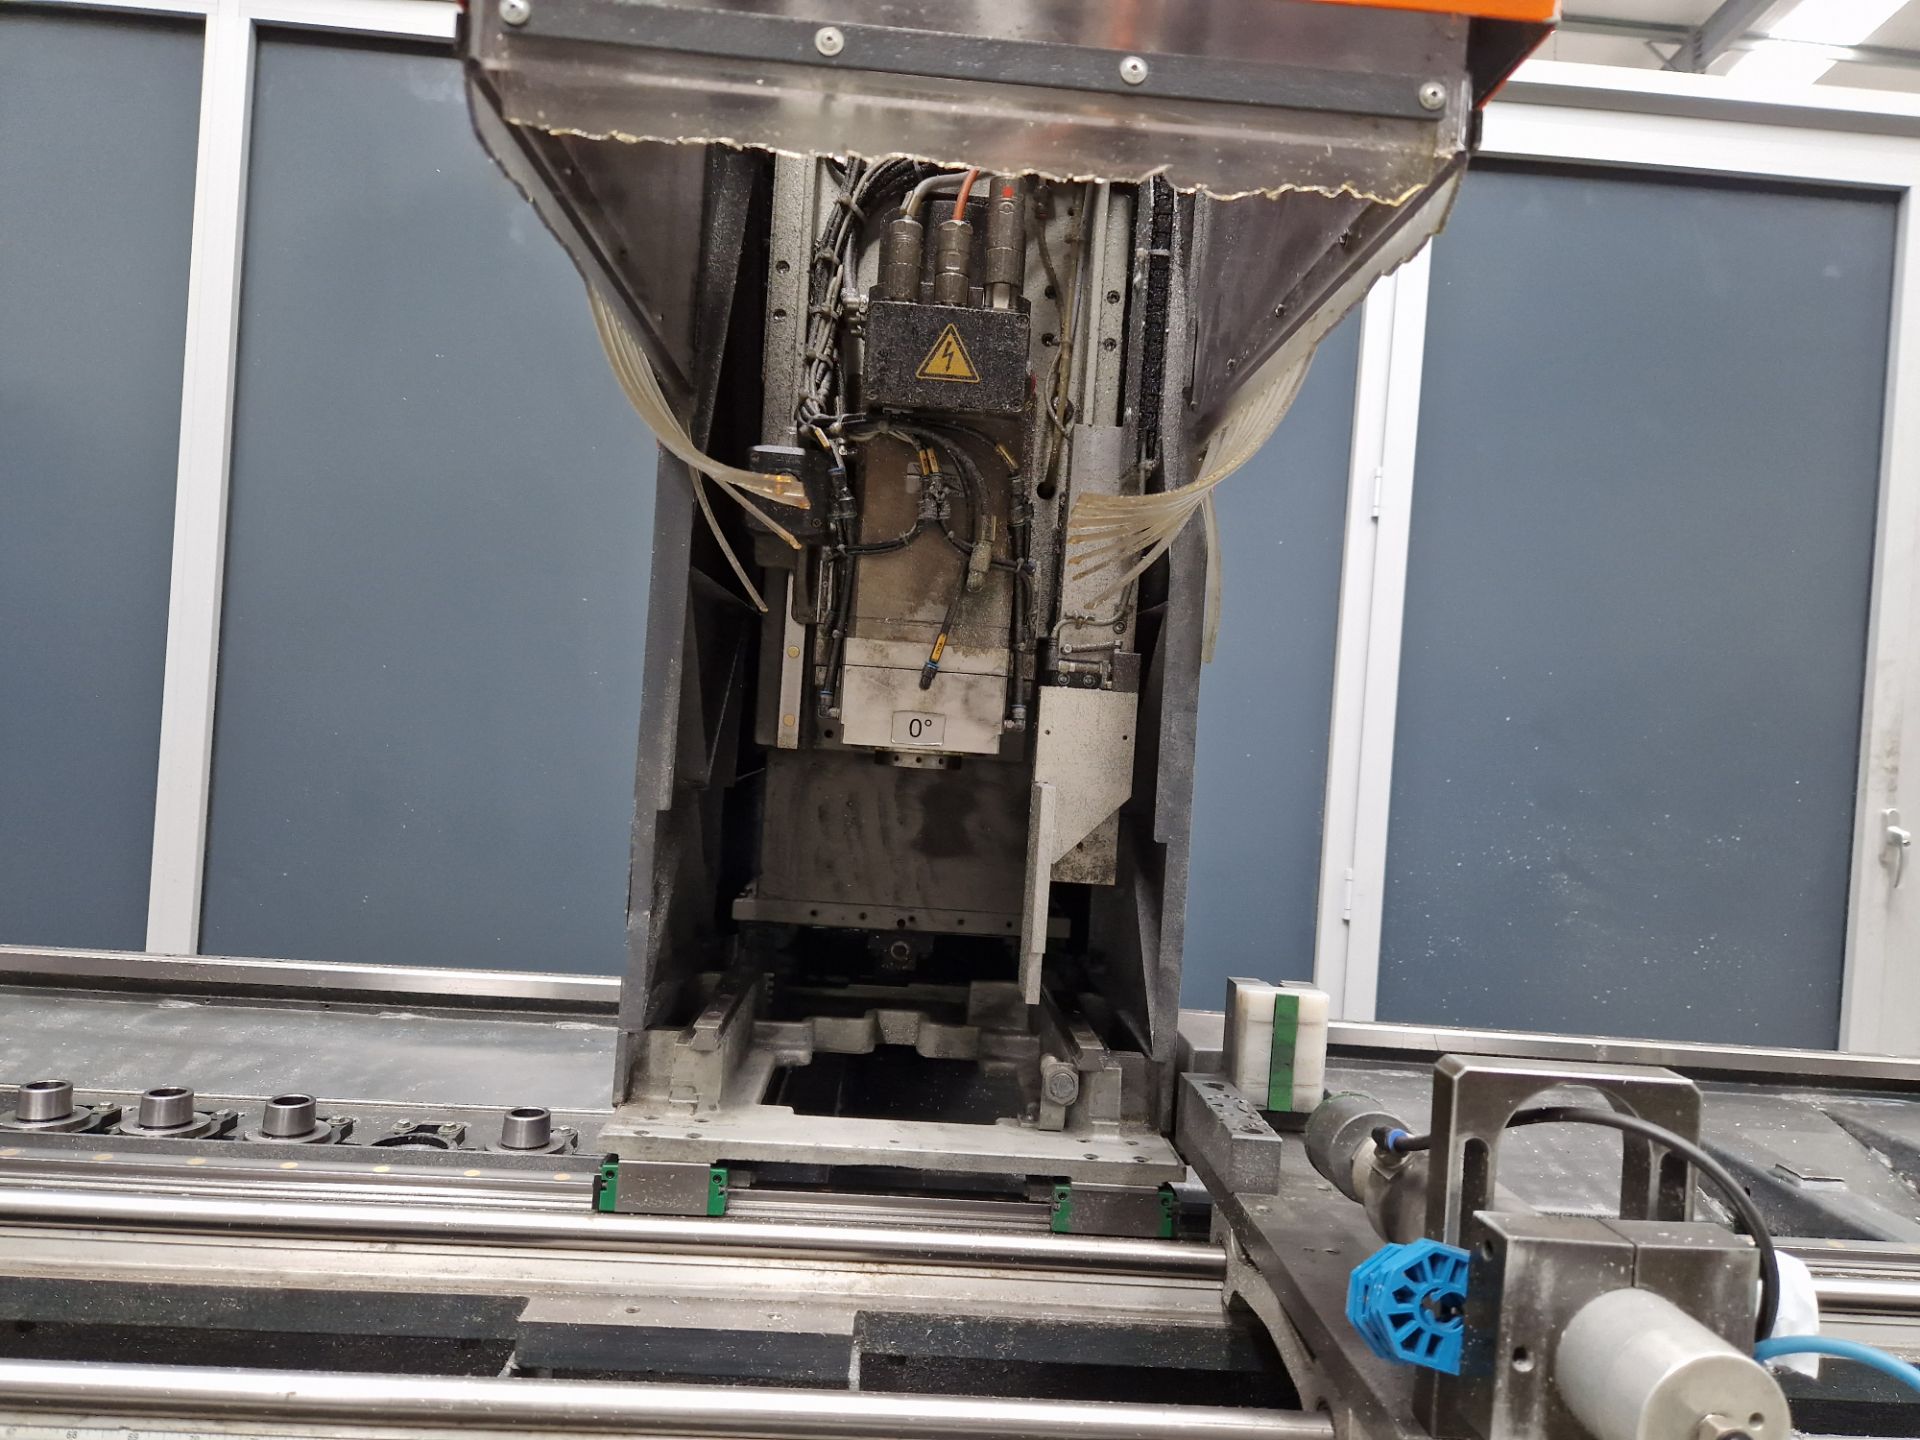 elumatec SBZ 122/33 CNC Profiling Machine, Serial No. 1223330678, Year of Manufacture 2014 with Sick - Image 6 of 8